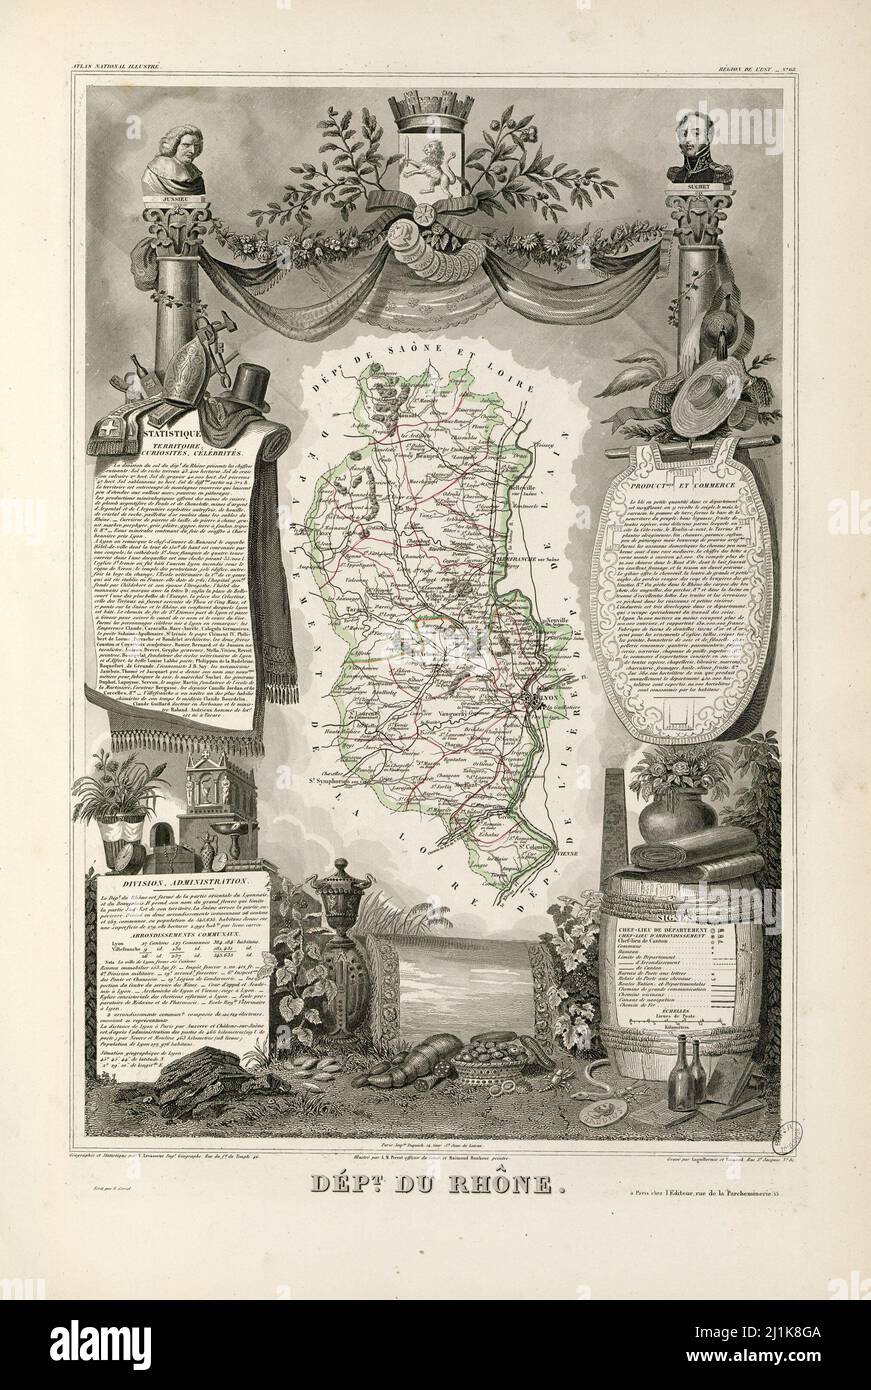 Vintage map French colonies and areas from 19th century. All maps are beautifully hand illustrated showing France at the time. Stock Photo